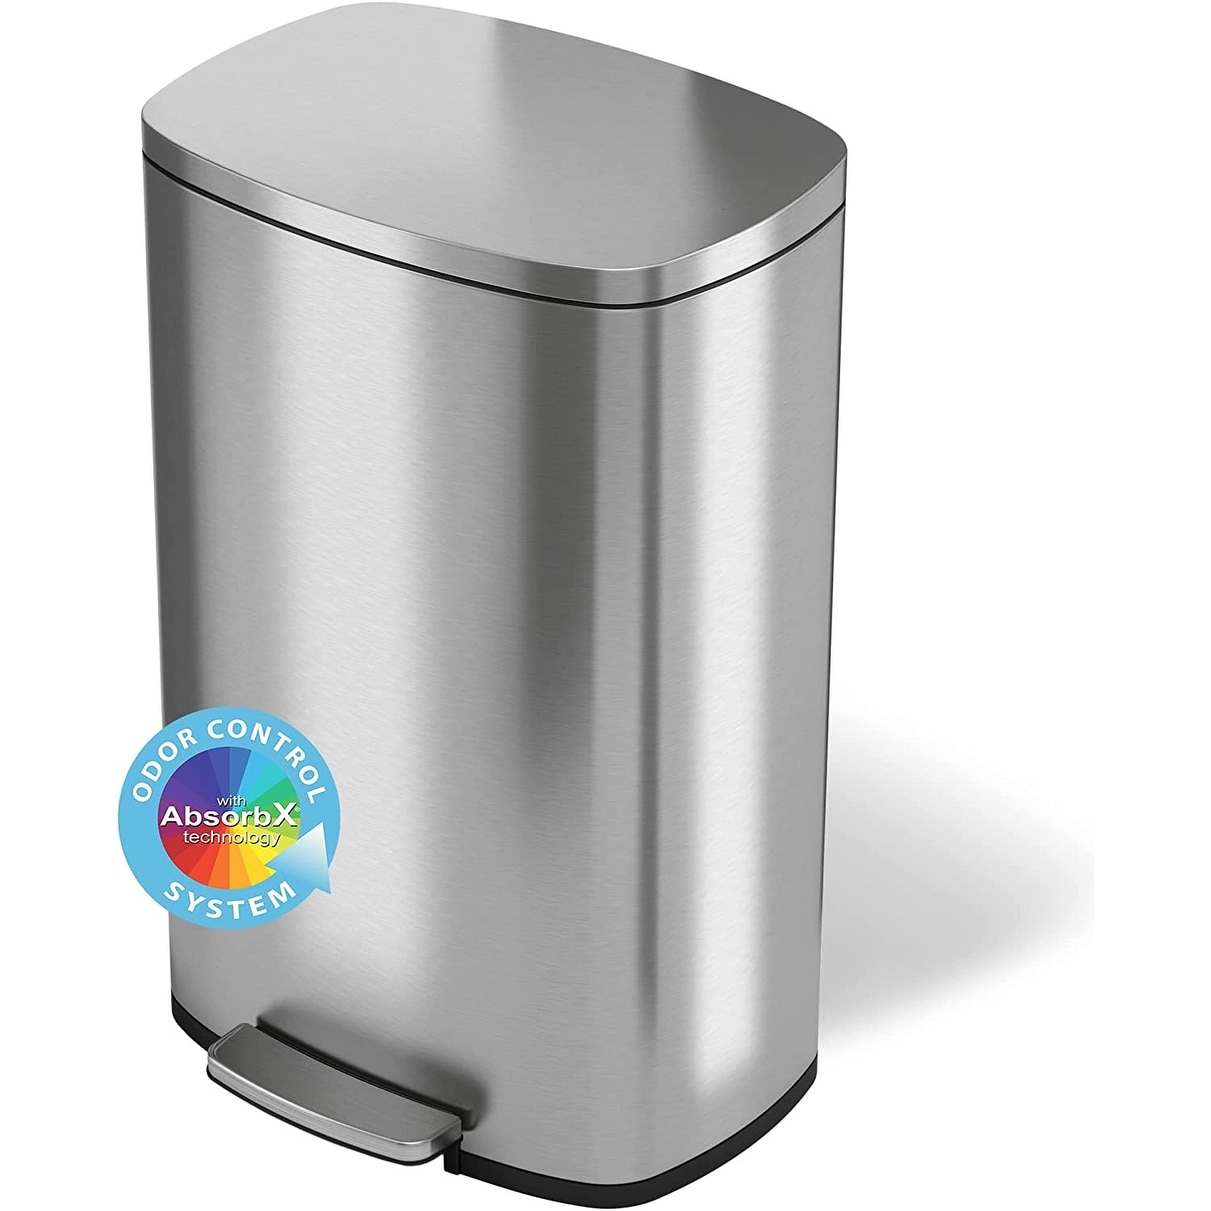 https://ak1.ostkcdn.com/images/products/is/images/direct/fd40f3db8fe7762260f36fa0351b3f715928dbe0/13.2-Gallon-Step-Trash-Can-with-Odor-Filter-System%2C-Stainless-Steel-50-Liter-Pedal-Garbage-Bin-for-Kitchen.jpg